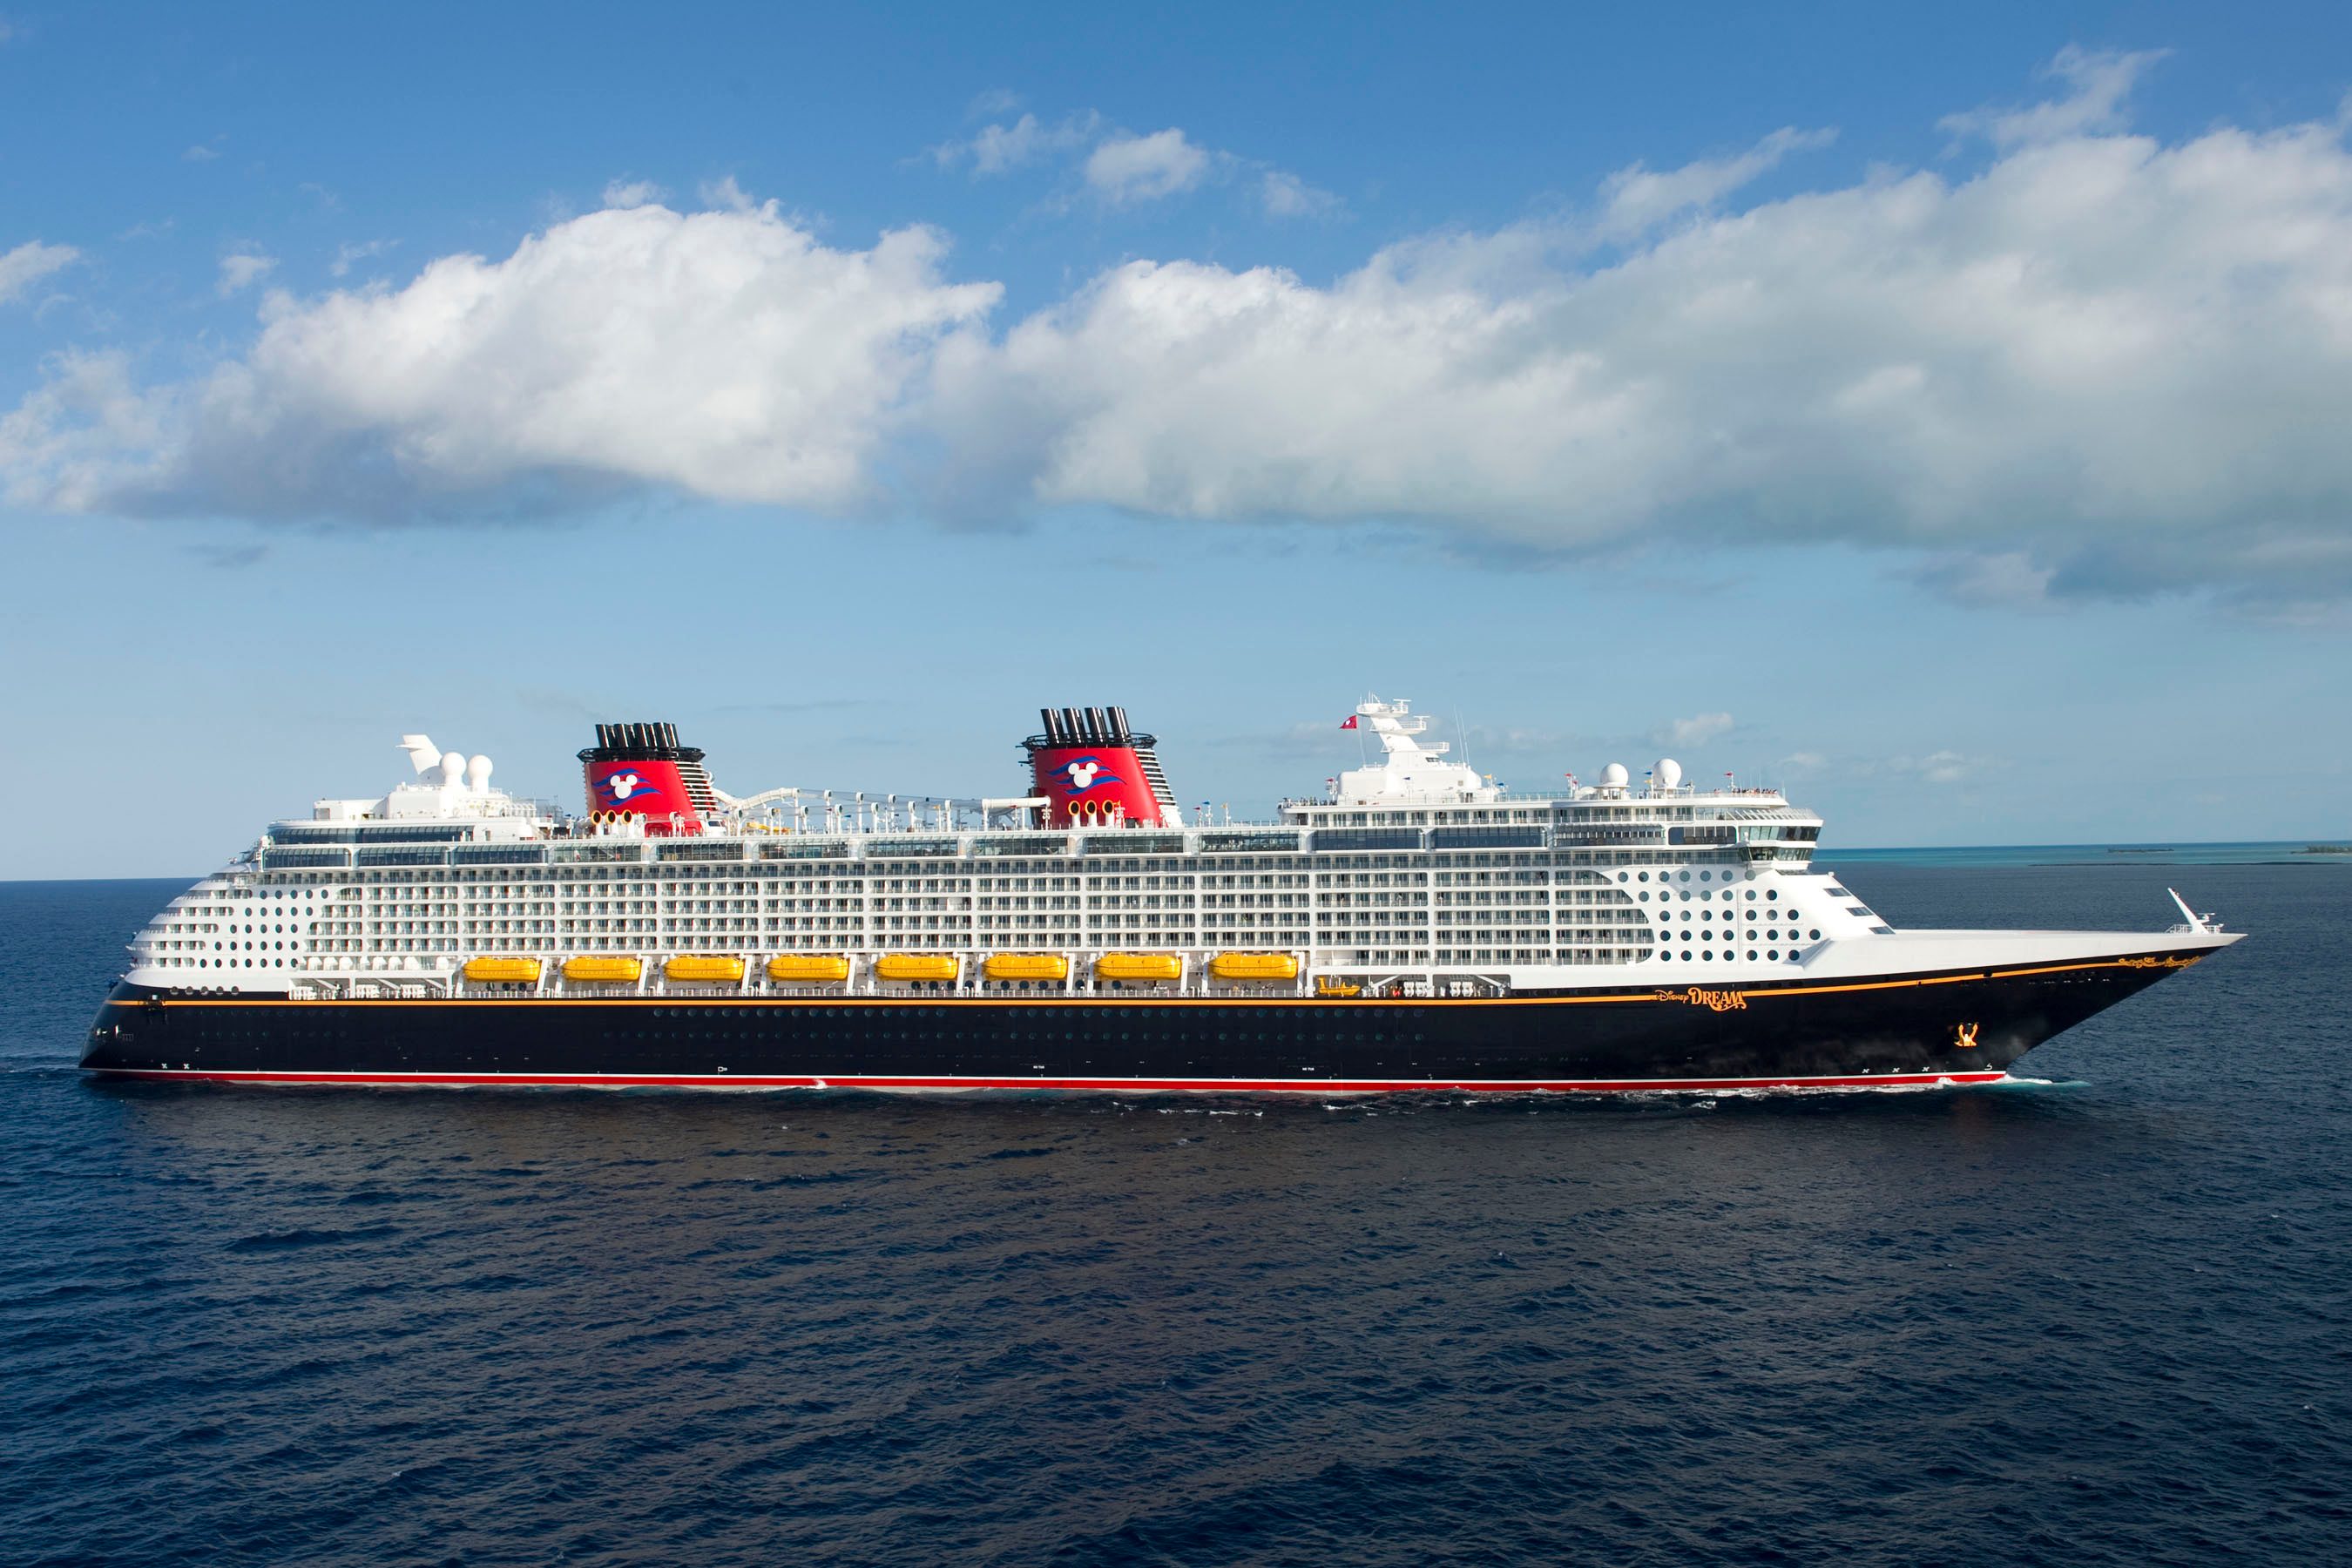 Disney Cruise Line announces Fall 2023 Itineraries Travel to the Magic